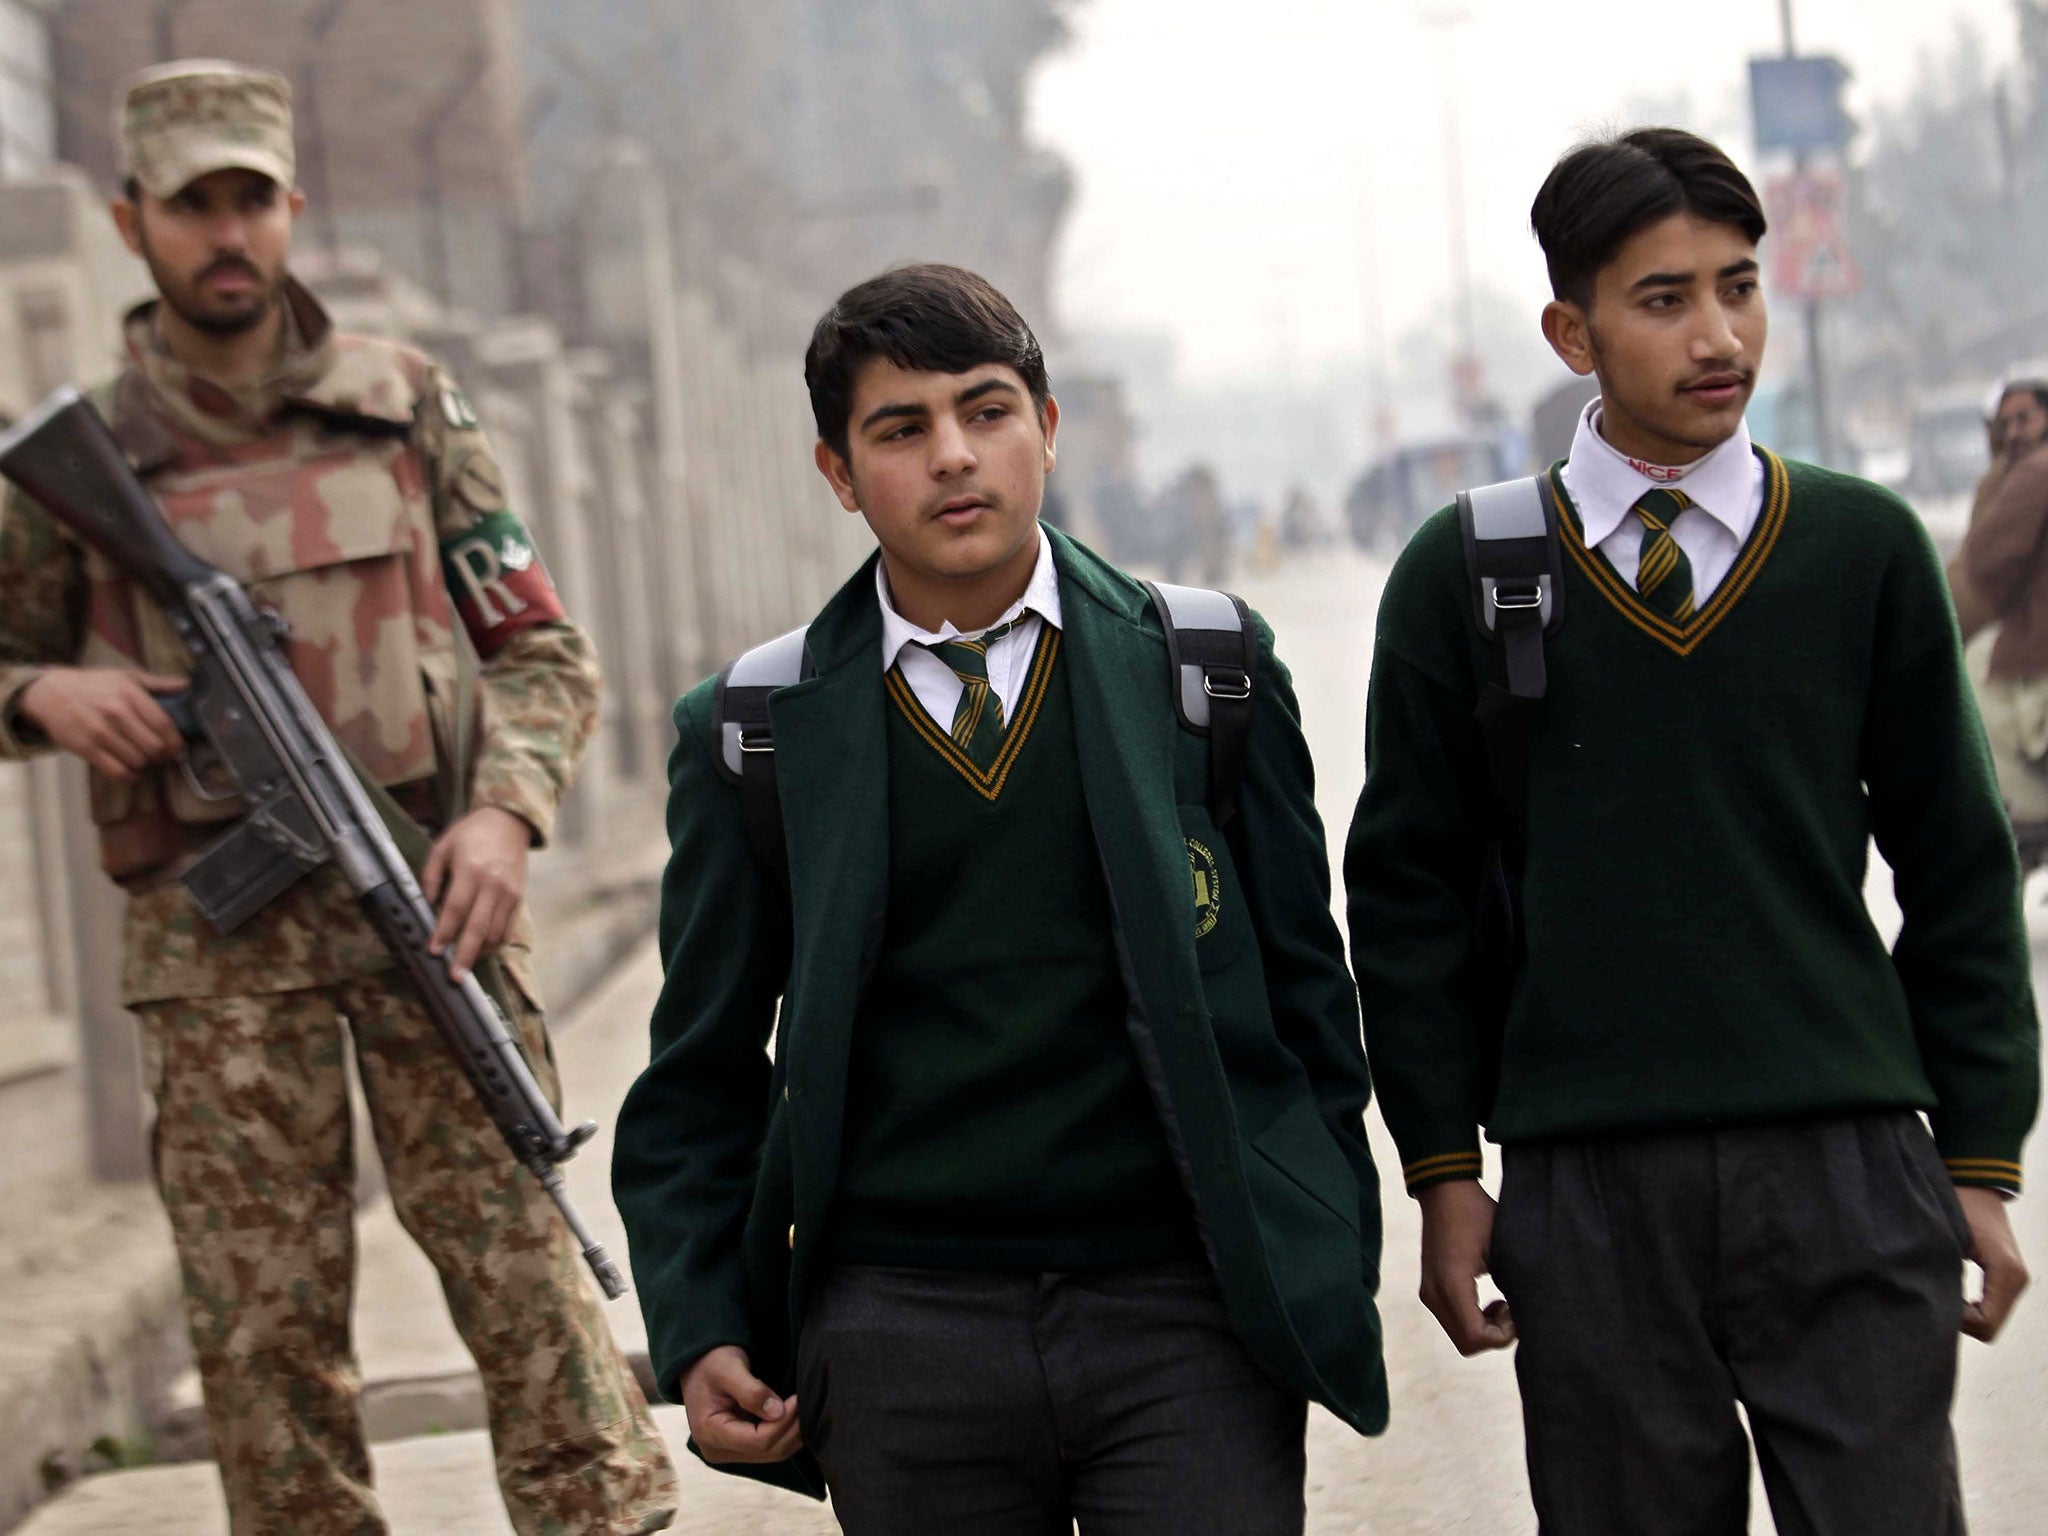 Pakistani school children leave the Army Public School after it was reopened following an attack by Taliban militants, in Peshawar